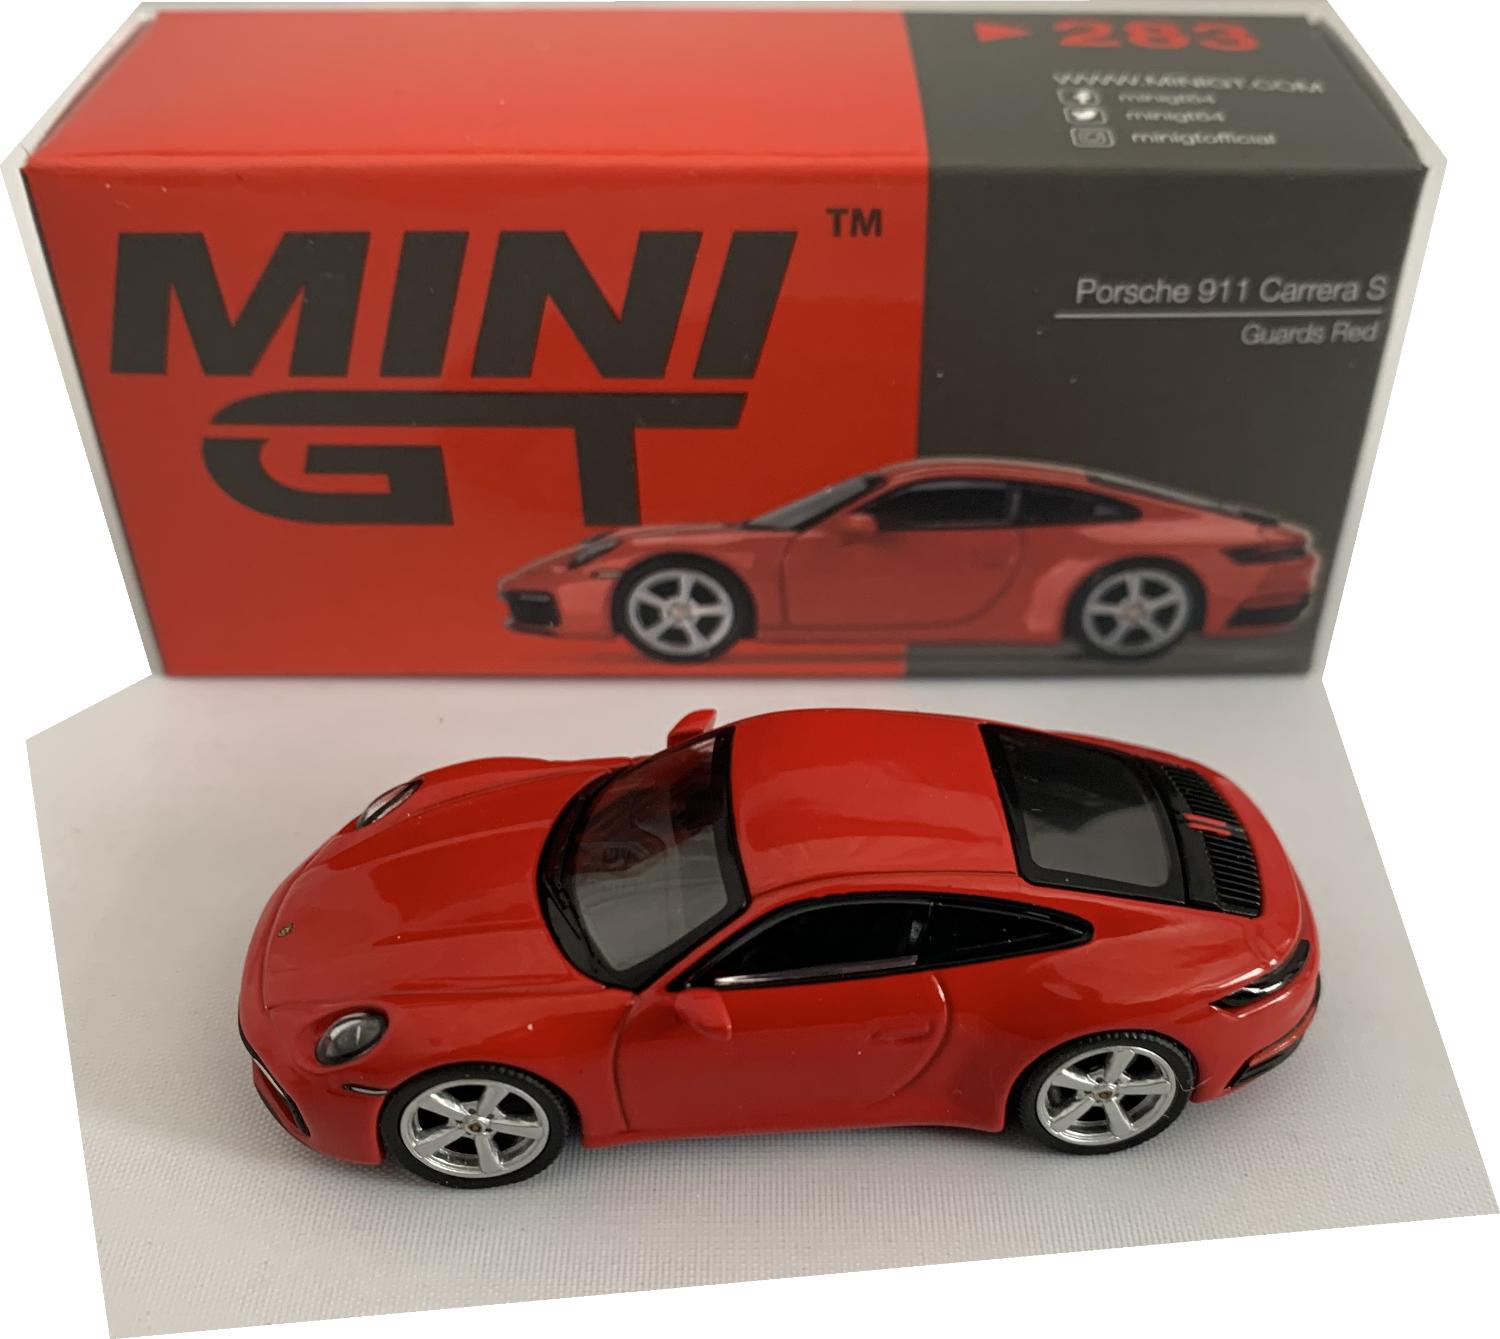 A good reproduction of the Porsche 911 Carrera S with detail throughout, all authentically recreated. The model is presented in a box, the car is approx. 7 cm long and the box is 10 cm long